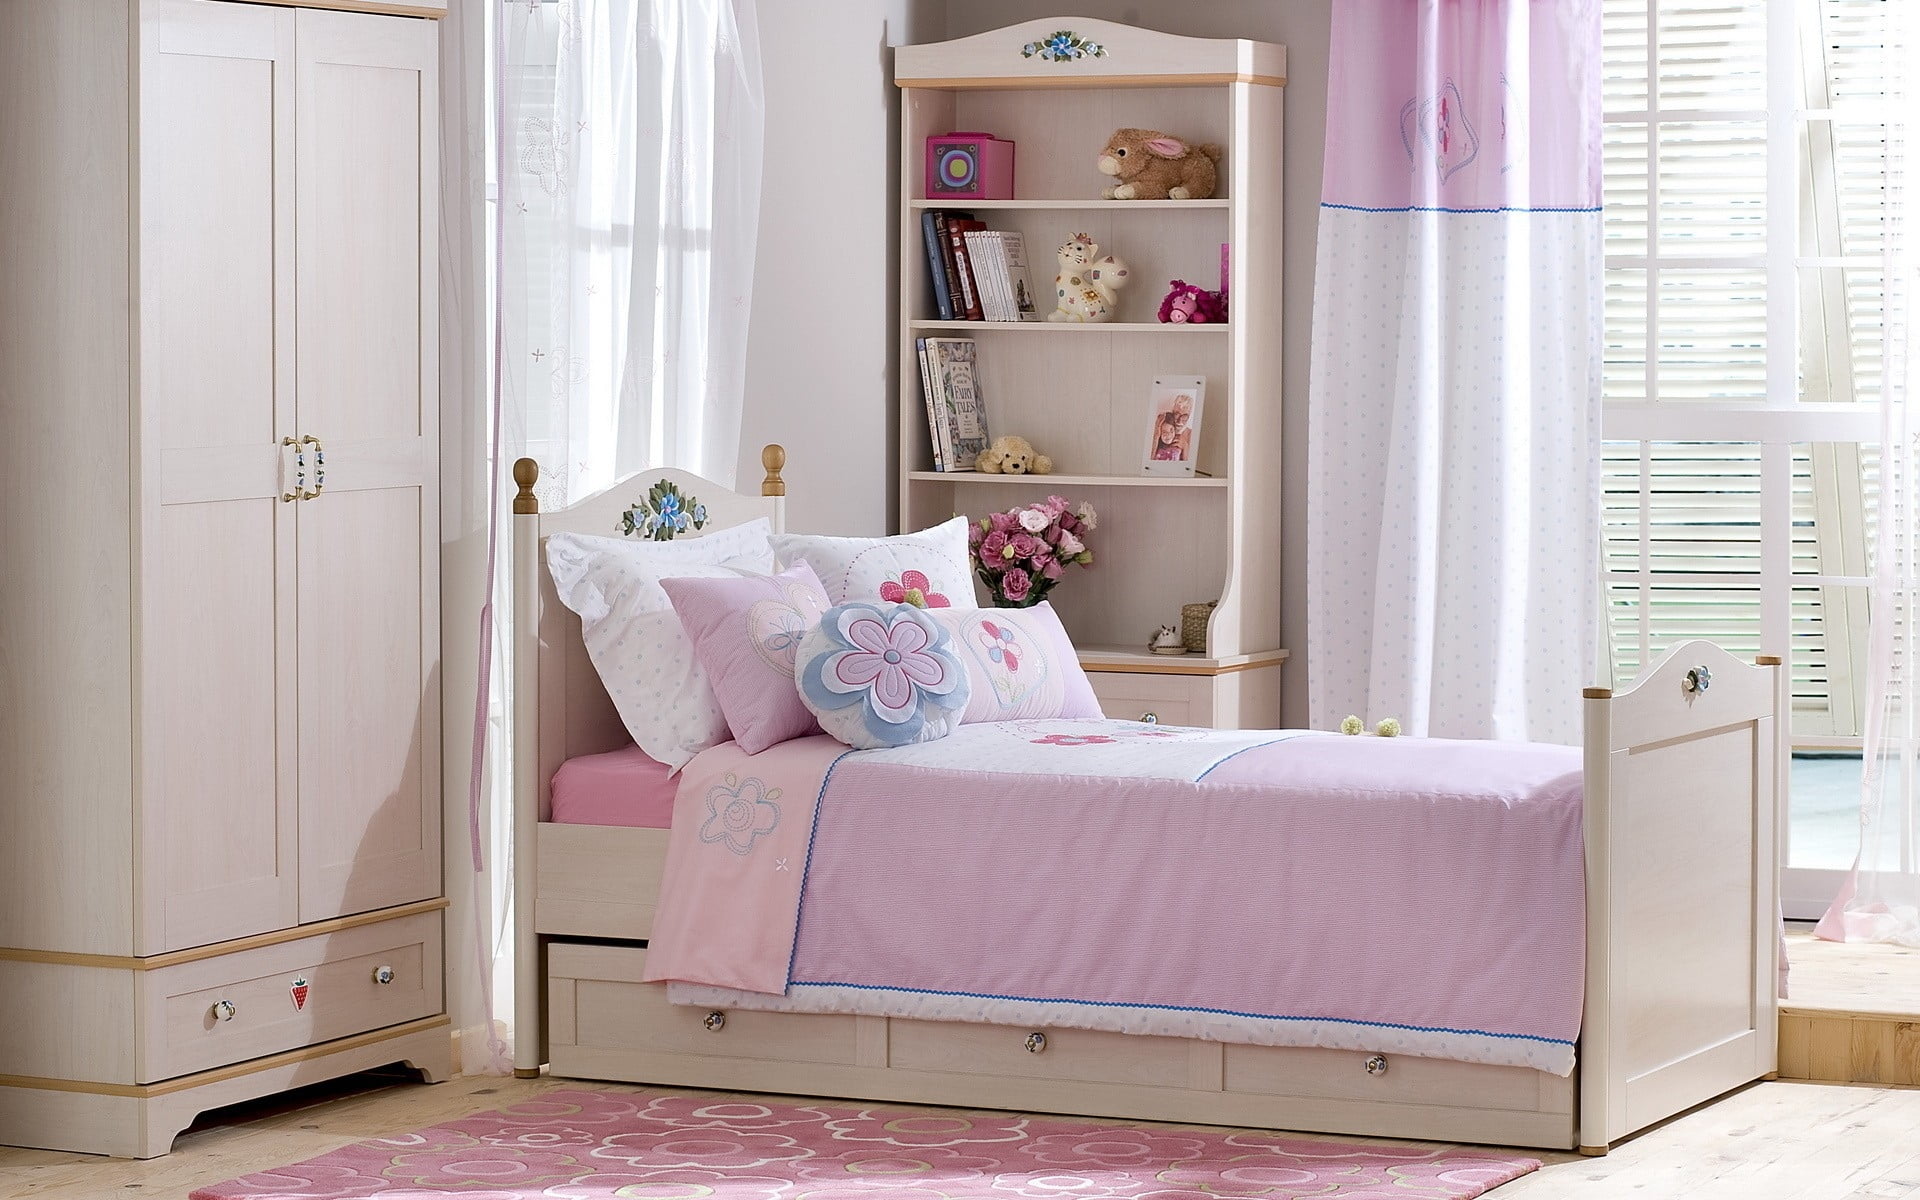 white wooden bed frame, wardrobe with shelf and bed pillows